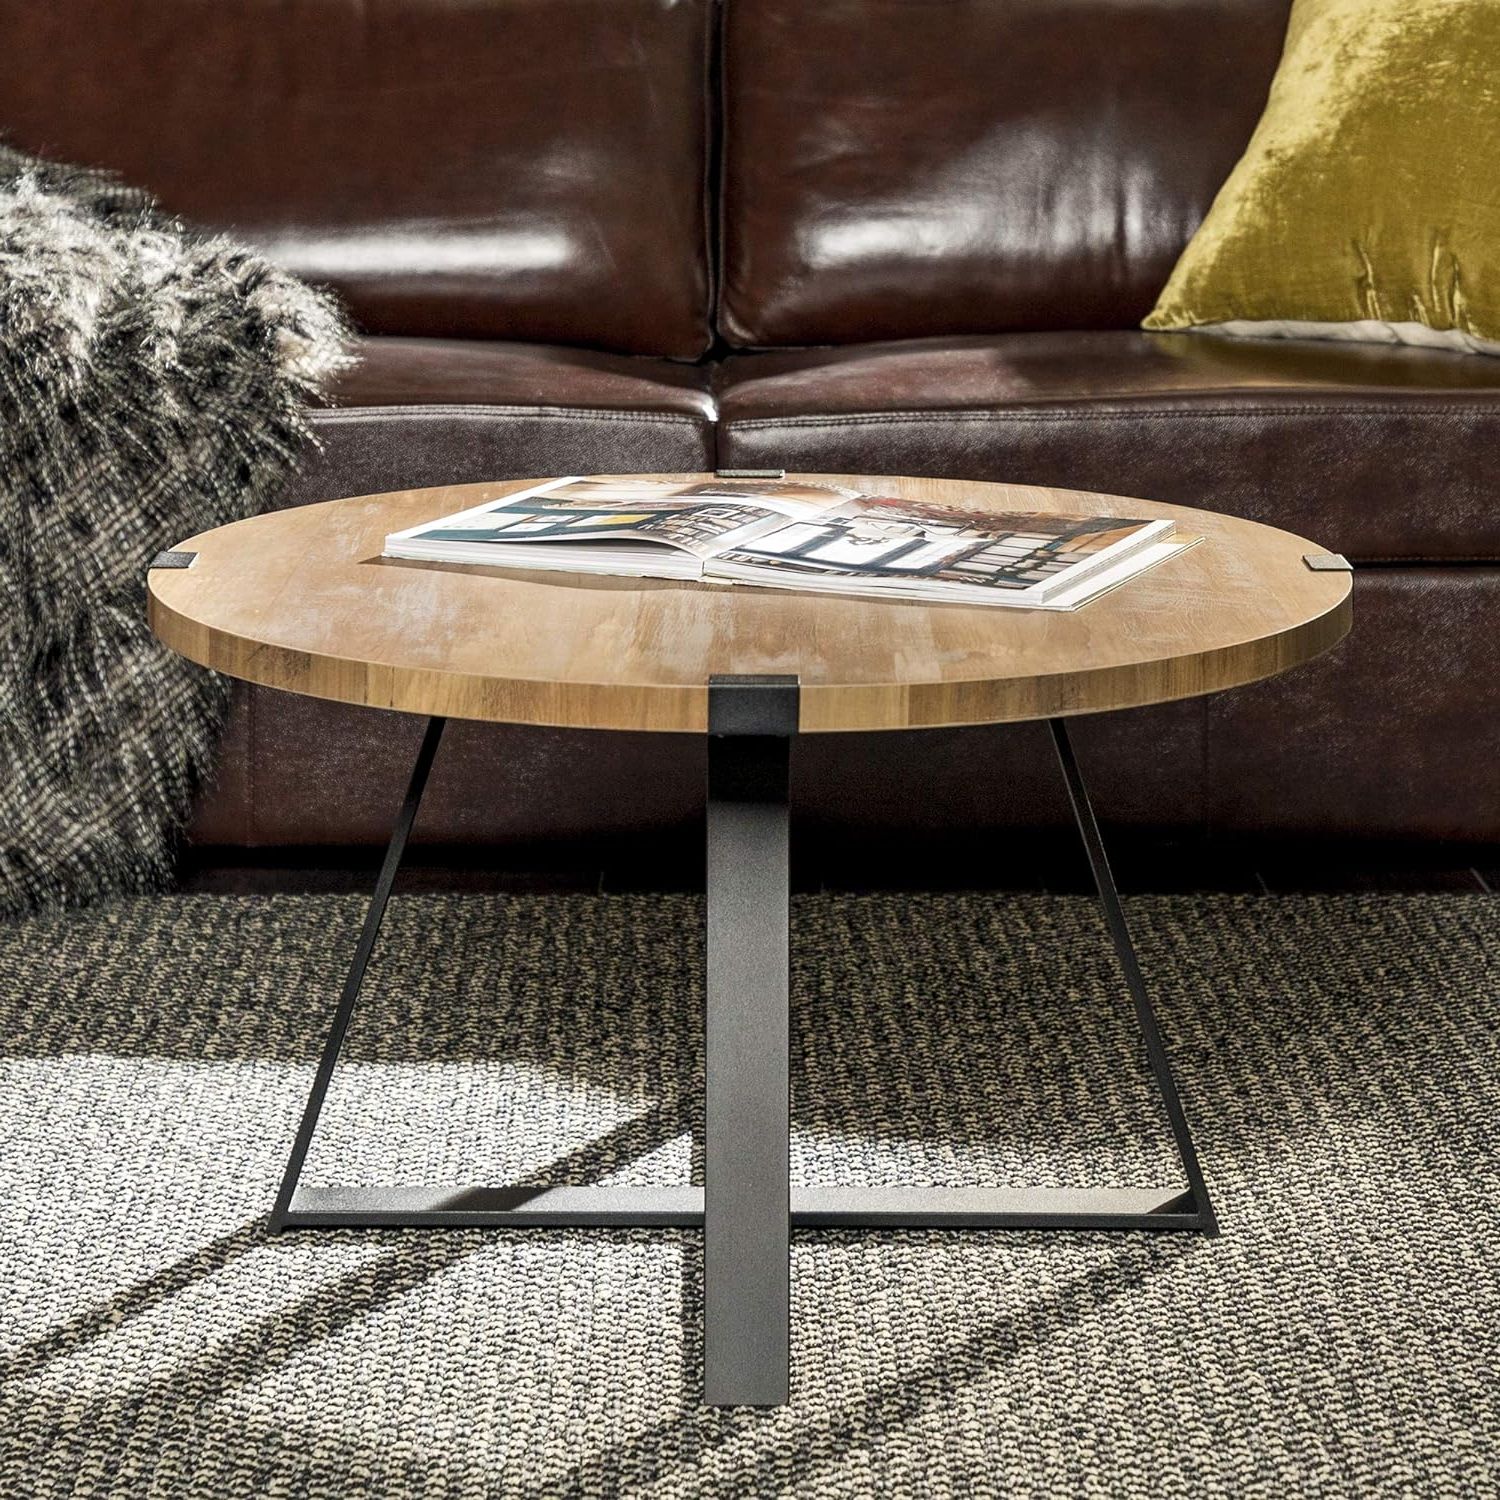 Eden Bridge Designs Industrial Urban Round Coffee Table, Metal Legs And Regarding Well Liked Coffee Tables With Metal Legs (View 8 of 15)